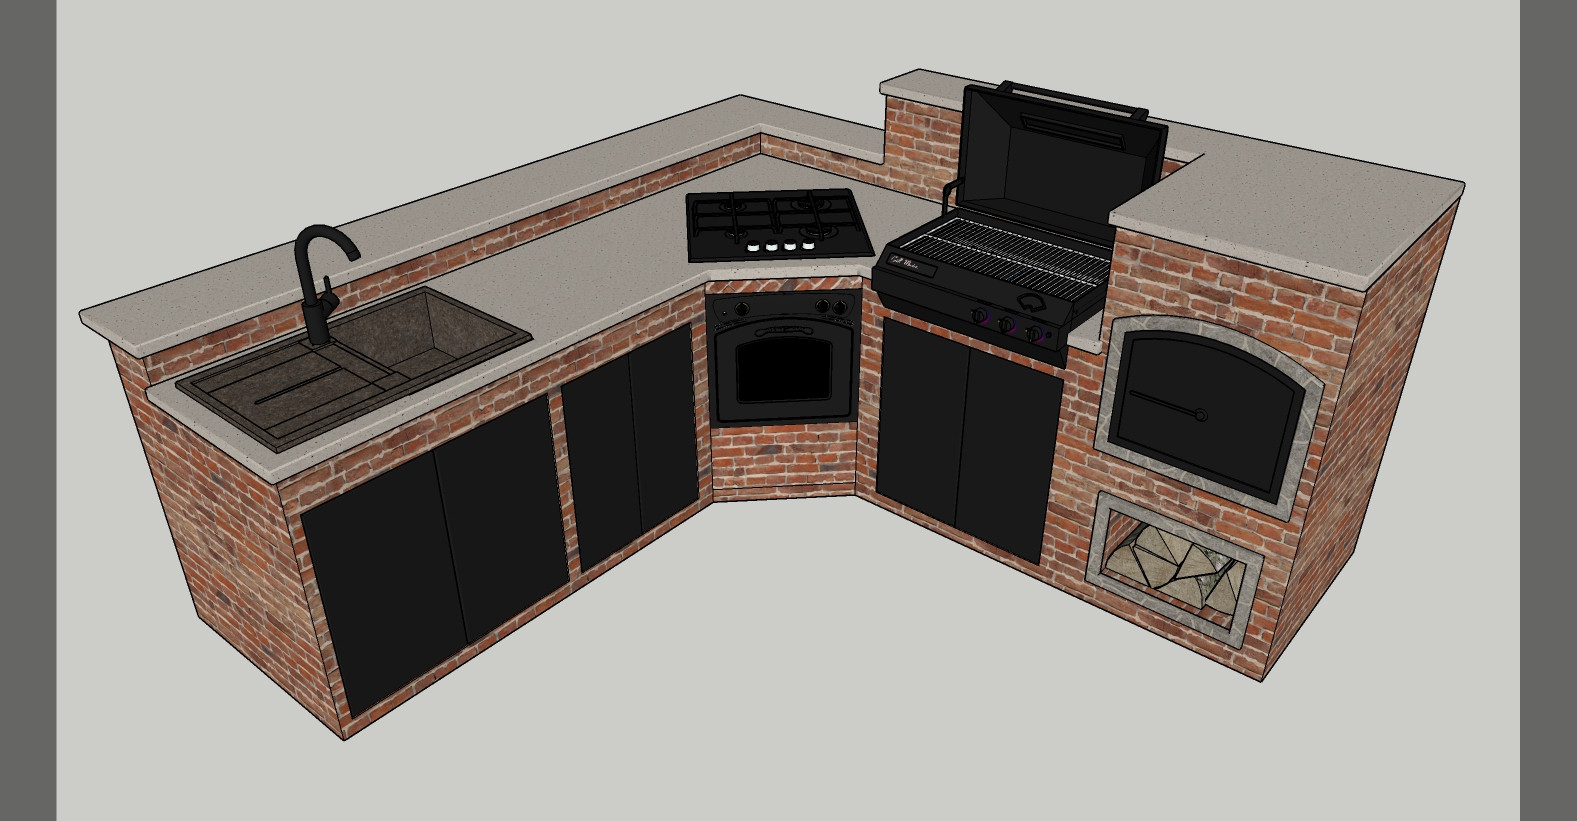 Outdoor Kitchen Sketchup
 Outdoor Kitchen With Pizza Oven 3D Model